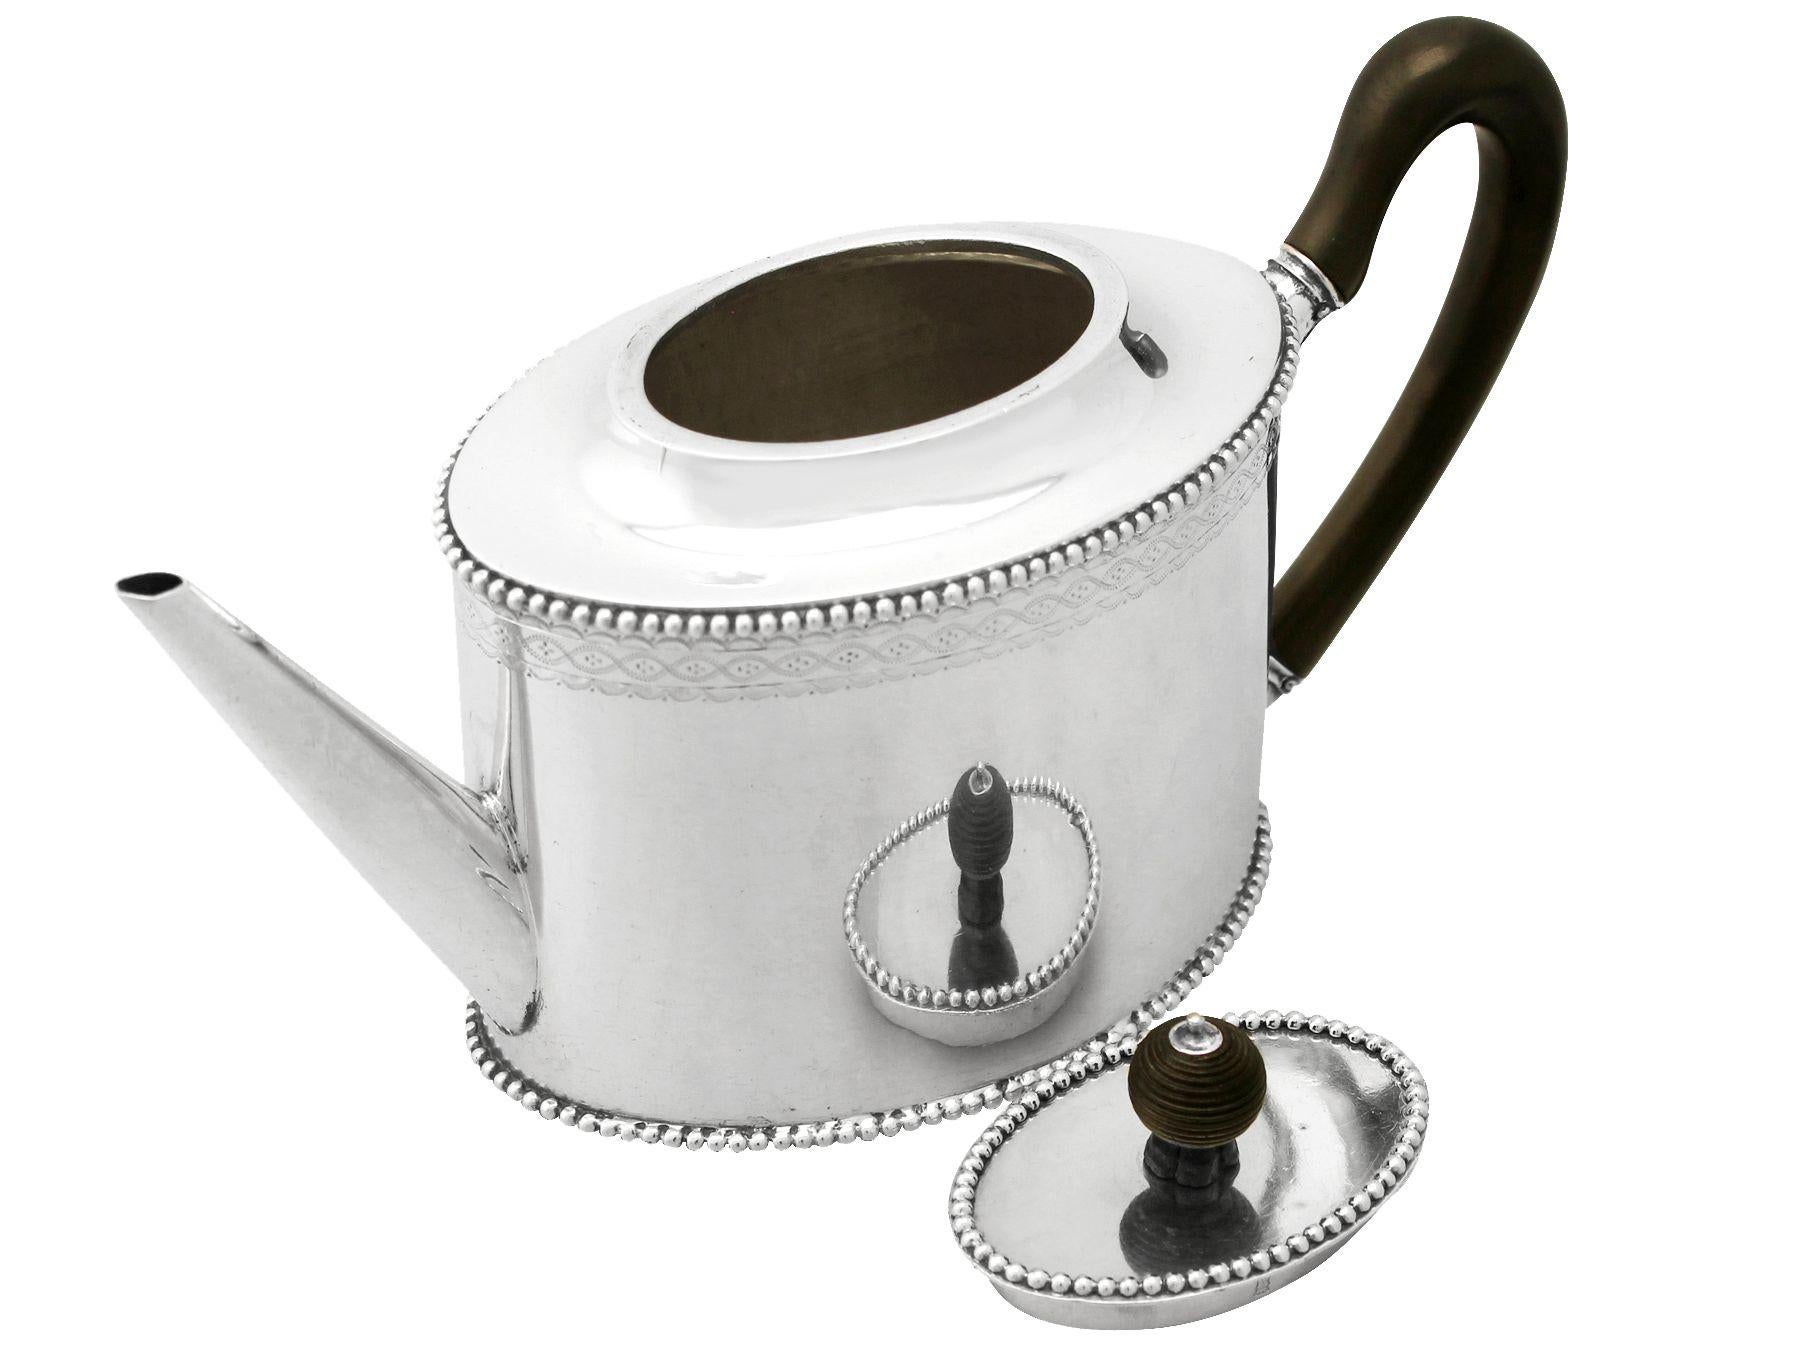 19th Century Dutch Silver Teapot In Excellent Condition For Sale In Jesmond, Newcastle Upon Tyne